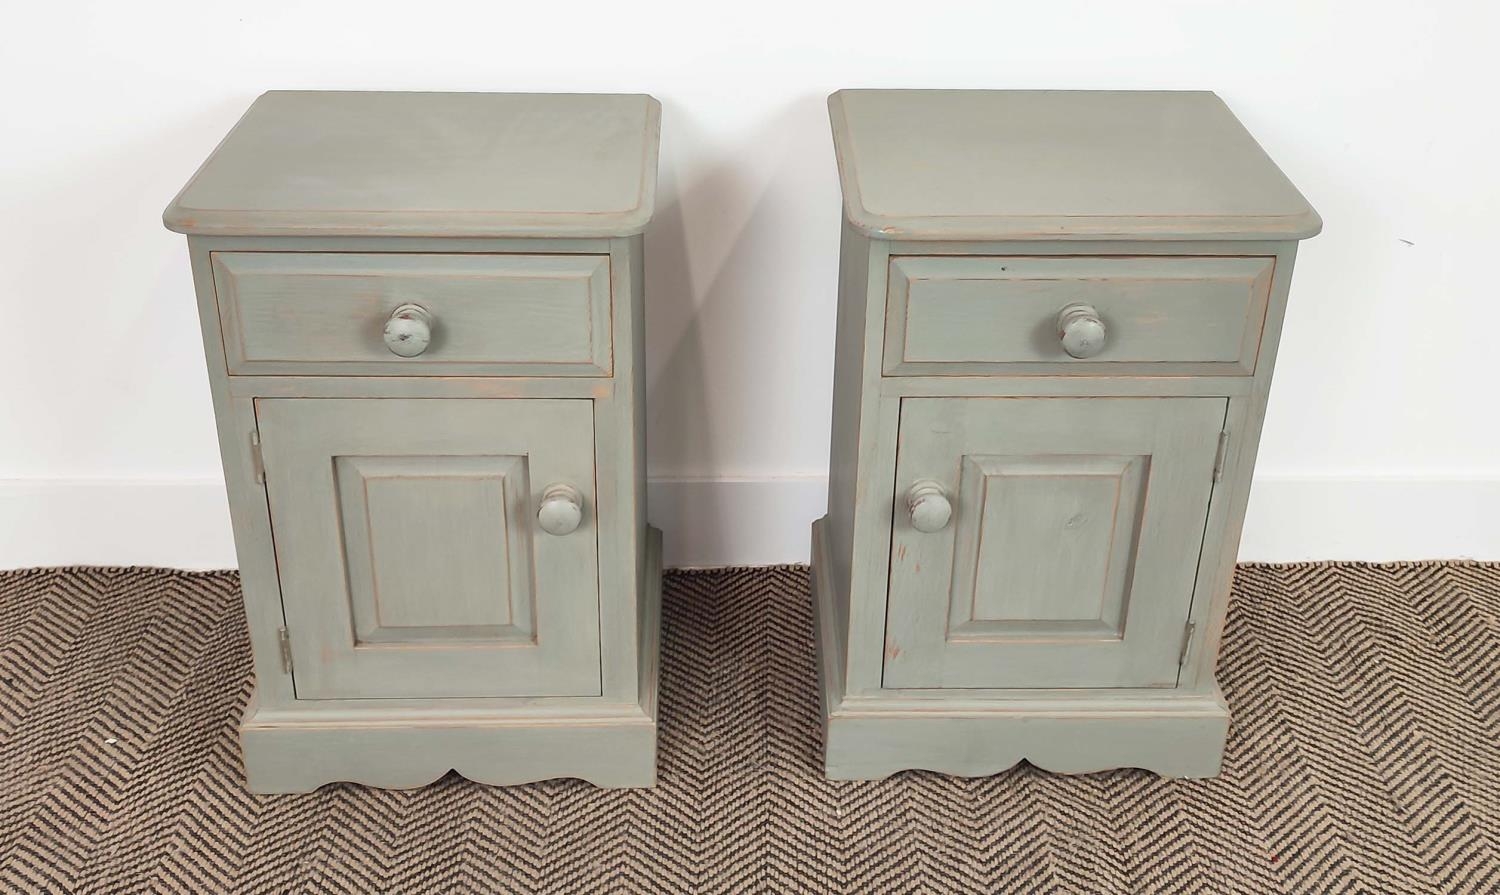 BEDSIDE CABINETS, a pair, grey painted, each with drawer and door, 60cm H x 40cm x 36cm. (2)